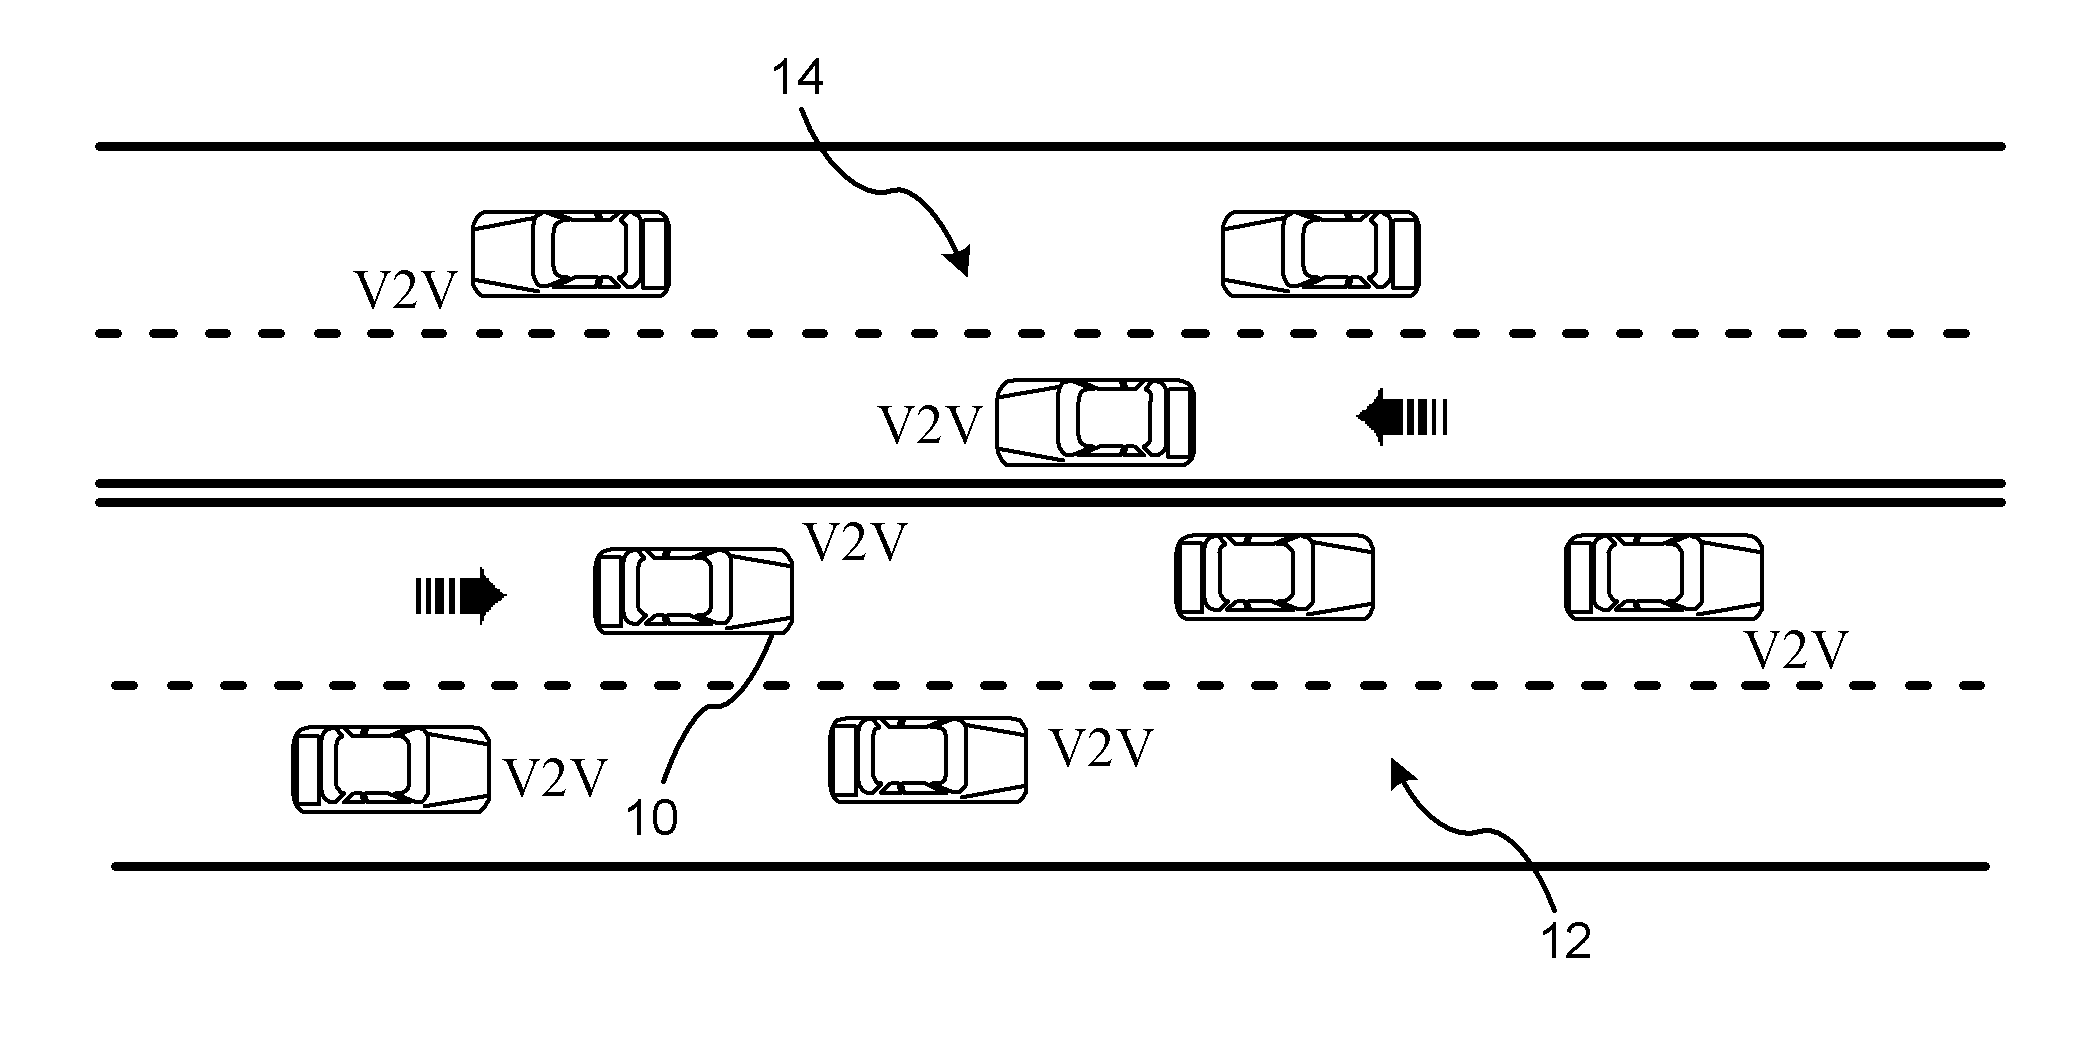 Reducing the Computational Load on Processors by Selectively Discarding Data in Vehicular Networks